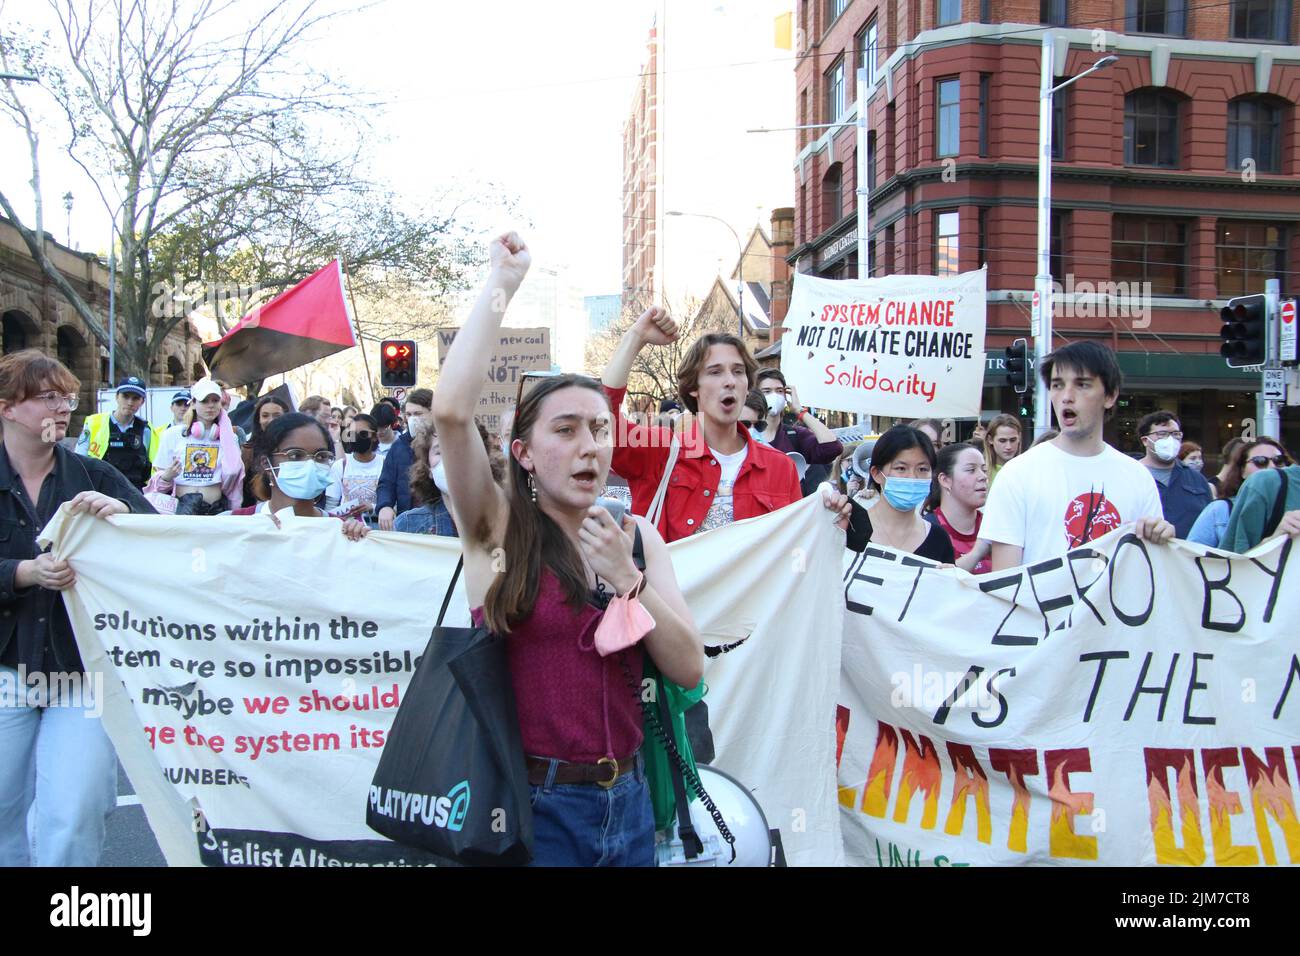 Sydney, Australia. 5th August 2022. University students and other activists across the country took part in a National Union of Students' Day of Action. They are protesting what they see as a woefully insufficient and lacklustre response to the climate crisis. Students demanded more action from the Albanese Labor Government. Protesters marched from the UTS Tower to the ALP (Labor Party) office. The list of protesters demands were….1. 100% public renewables by 2030; 2. Fund an immediate just transition for workers; 3. Land rights, not mining rights. First Nations sovereignty now!; 4. Scrap the Stock Photo